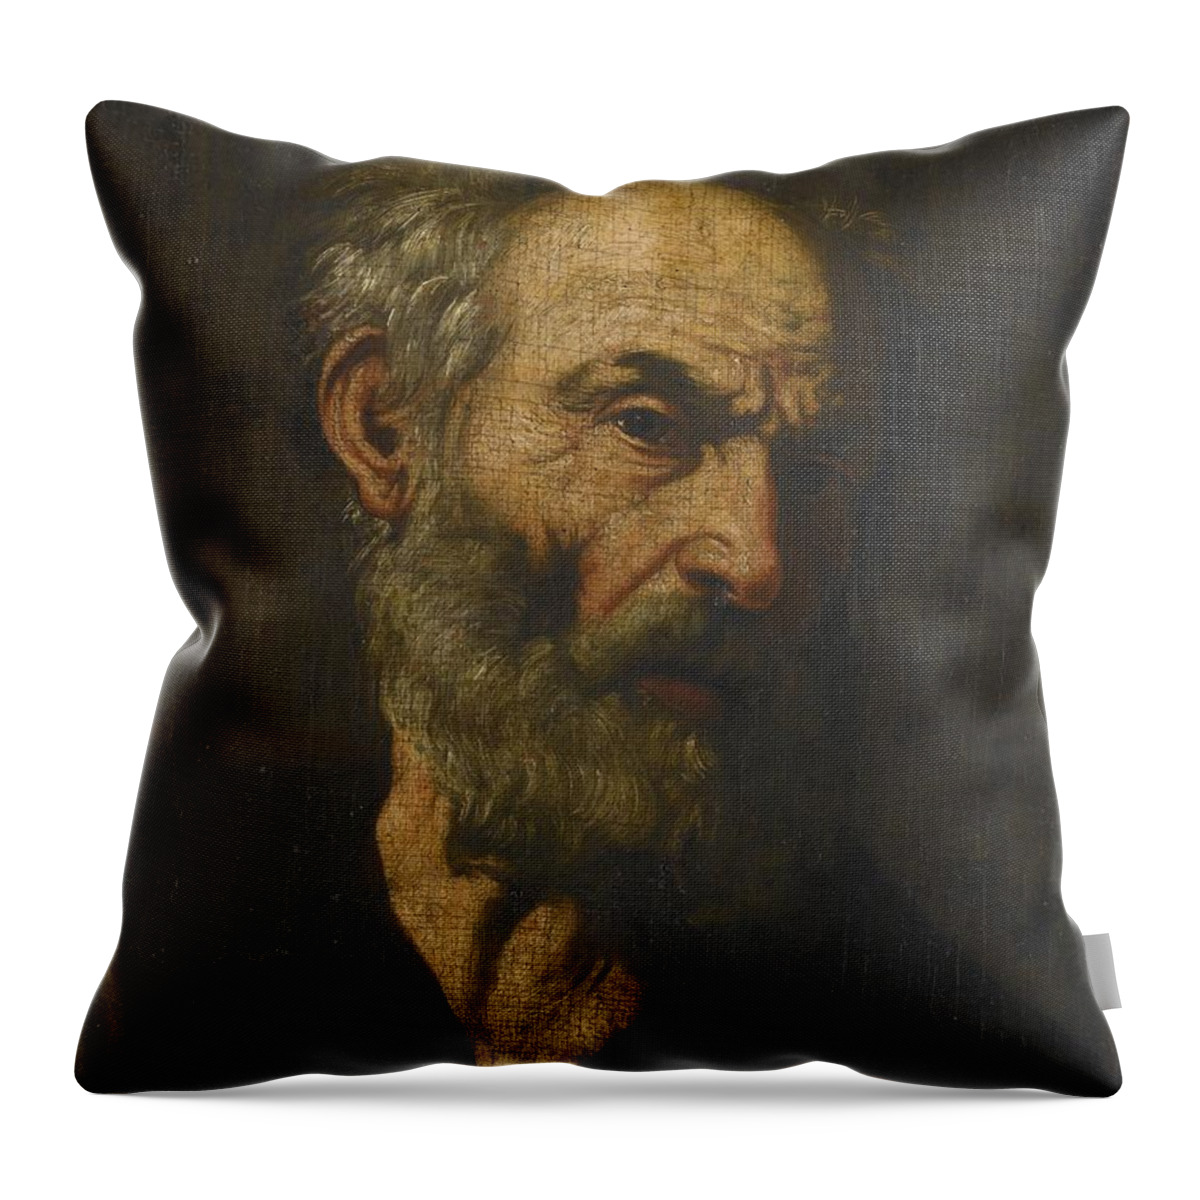 Workshop Of Jusepe De Ribera Throw Pillow featuring the painting Head Of A Man by MotionAge Designs